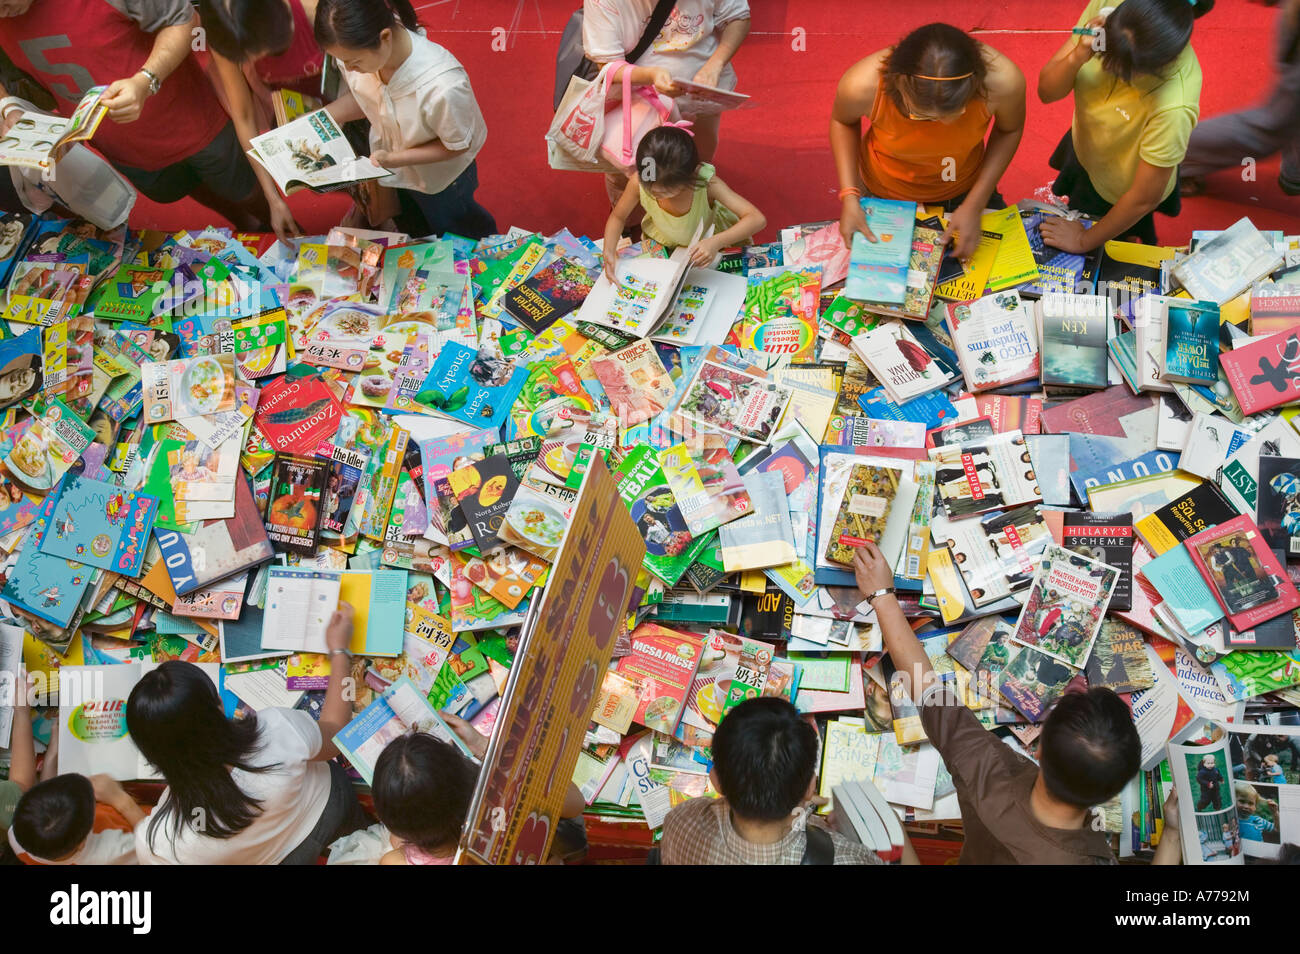 Shopping for books in an Orchard Road shopping mall, Singapore. Stock Photo